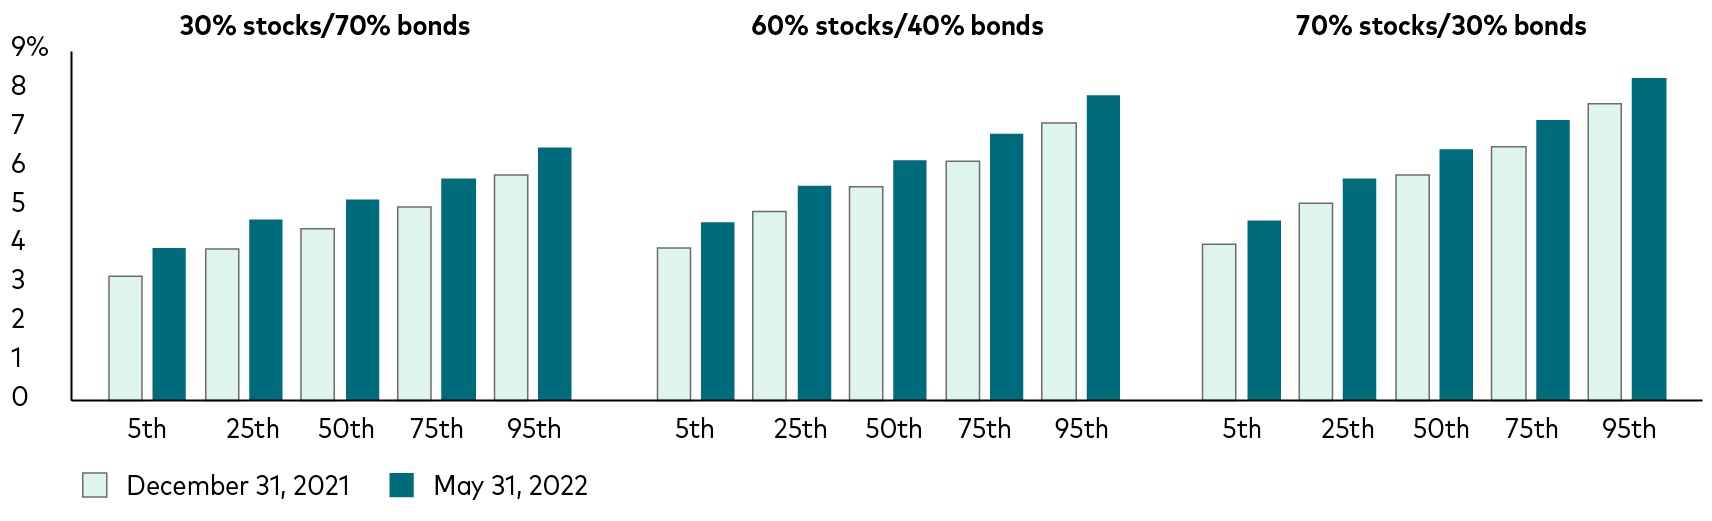 Expected future returns of a portfolio that’s 30% stocks and 70% bonds, a portfolio that’s 60/40, and one that’s 70/30. Returns are shown at the 5th percentile of all simulations, 25th percentile, 50th percentile, 75th percentile, and 95th percentile. In all scenarios, the annualized returns ranged from 3.2% to 8.3%. The heavier the stock allocation, the better the returns. 